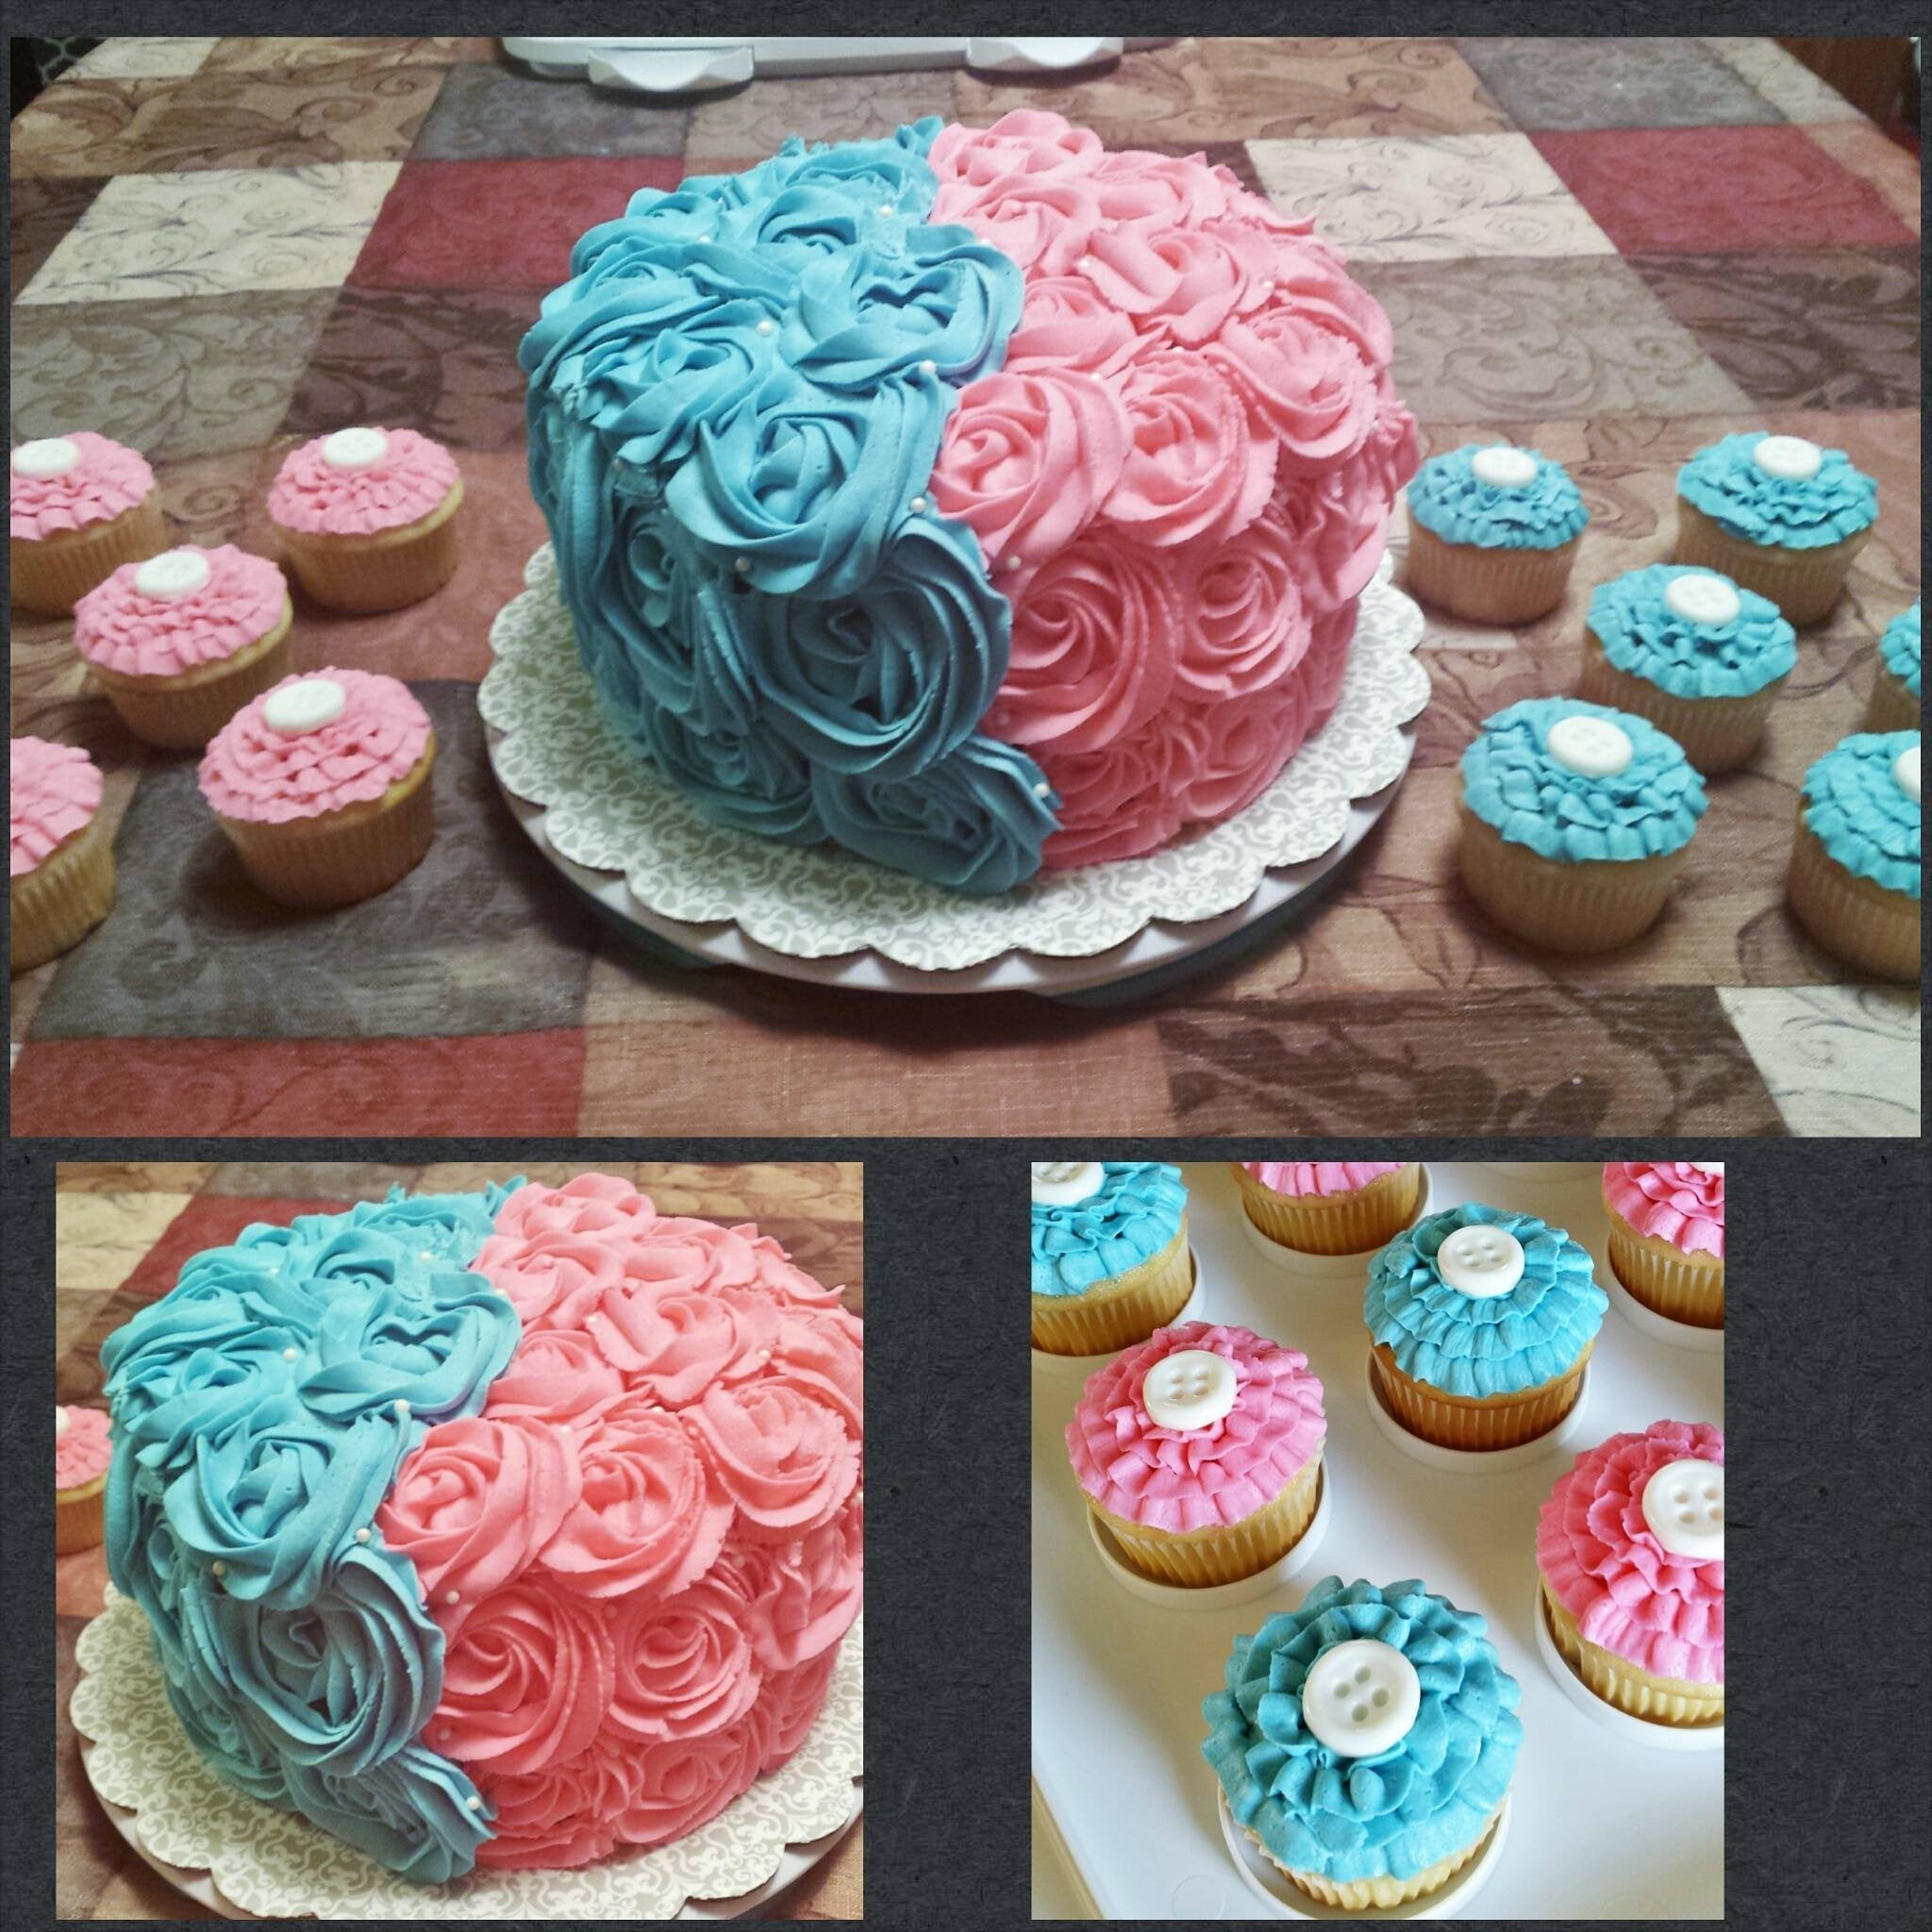 Cake Ideas For Gender Reveal Party
 I made the cake and cupcakes for a baby gender reveal